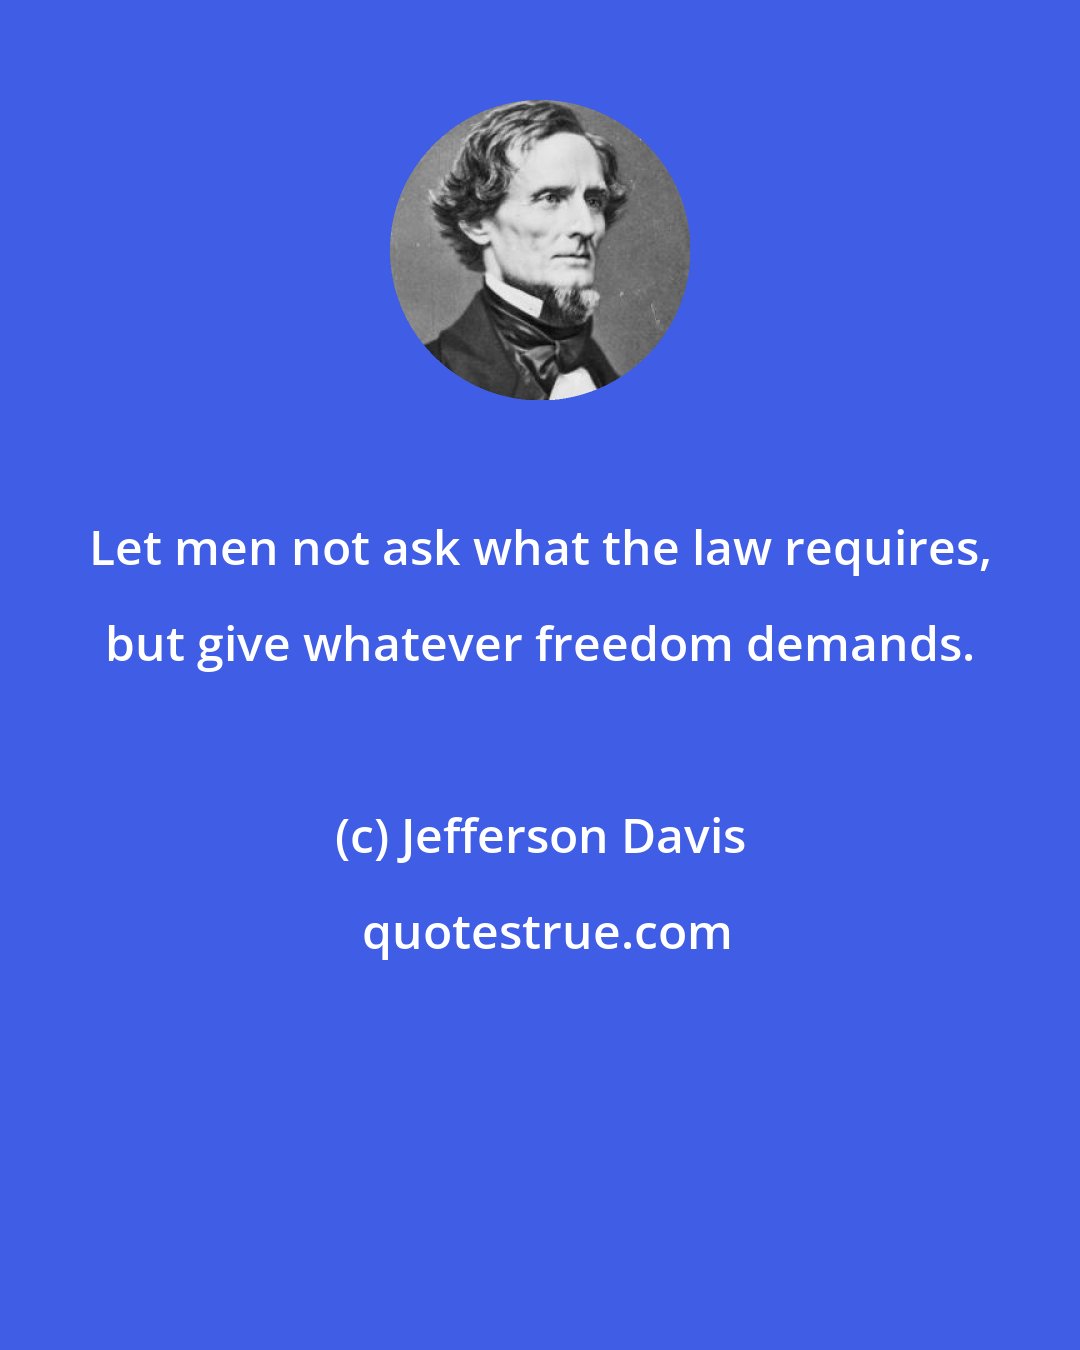 Jefferson Davis: Let men not ask what the law requires, but give whatever freedom demands.